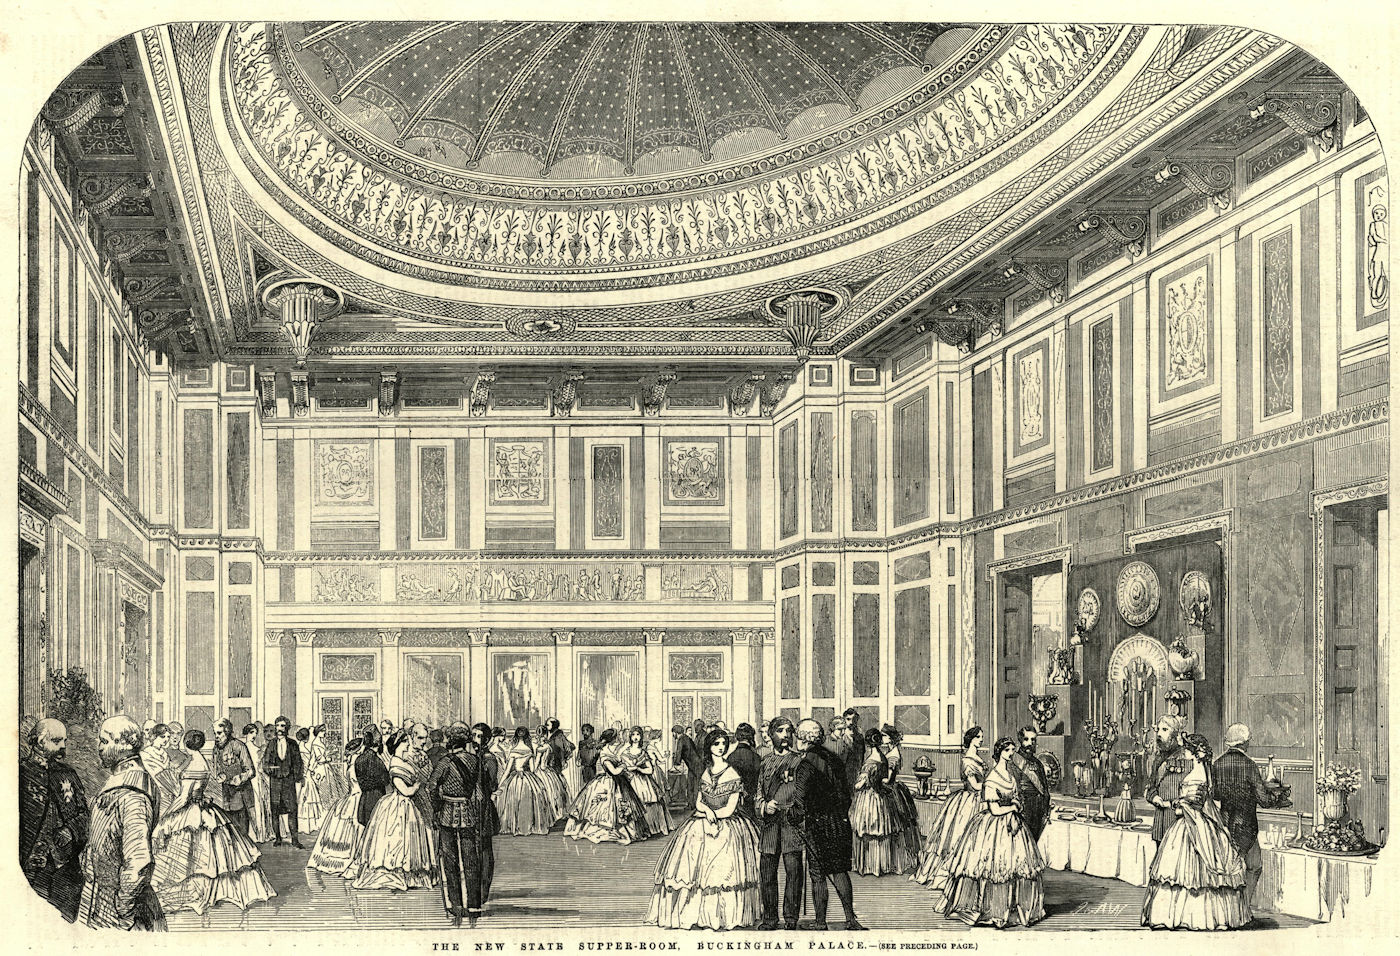 Associate Product The new state supper room, Buckingham Palace. London 1857 old antique print